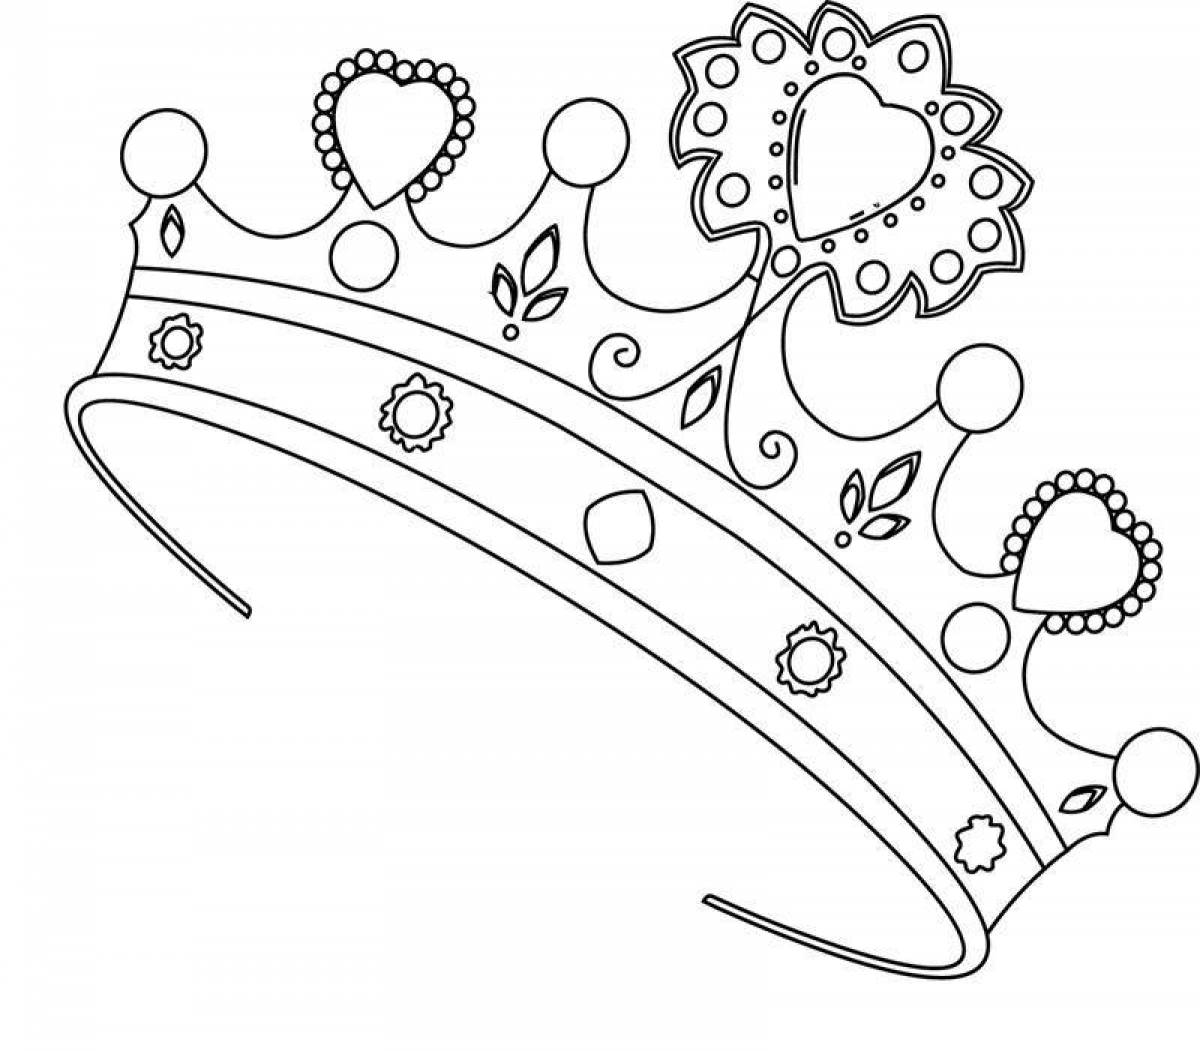 Bright crown coloring book for kids